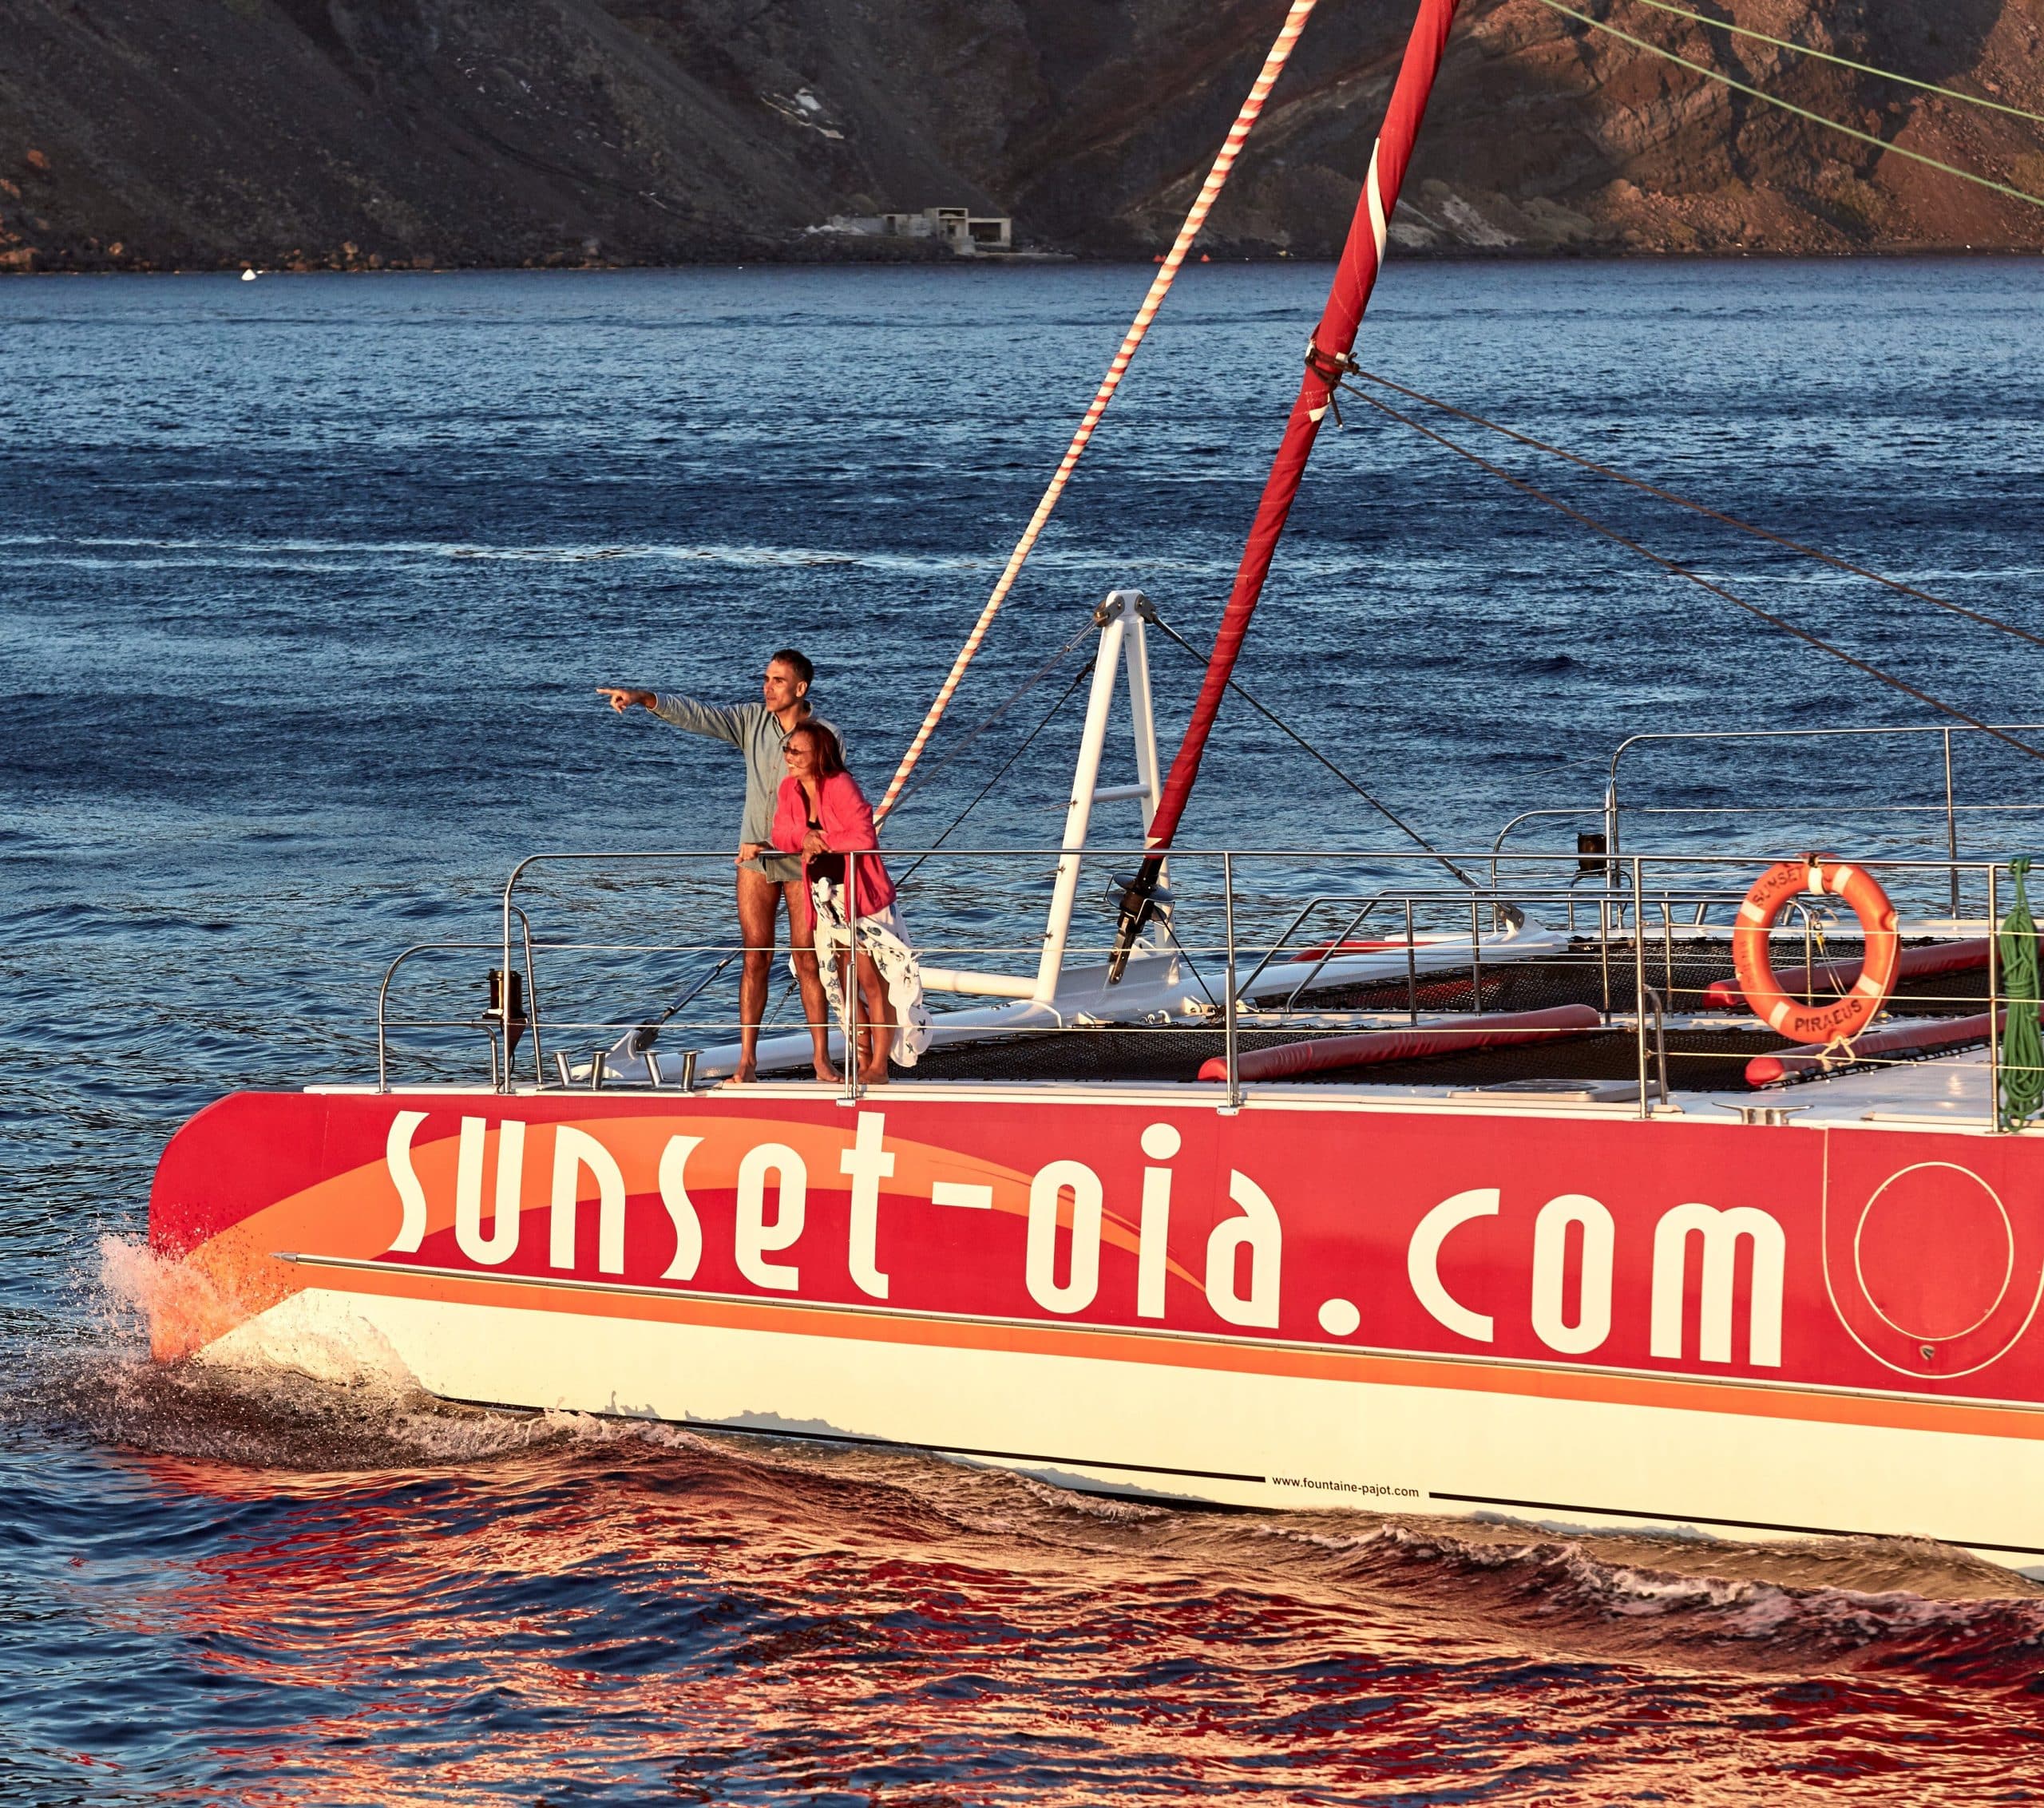 You will love your day trip with Sunset Oia Sailing Cruises